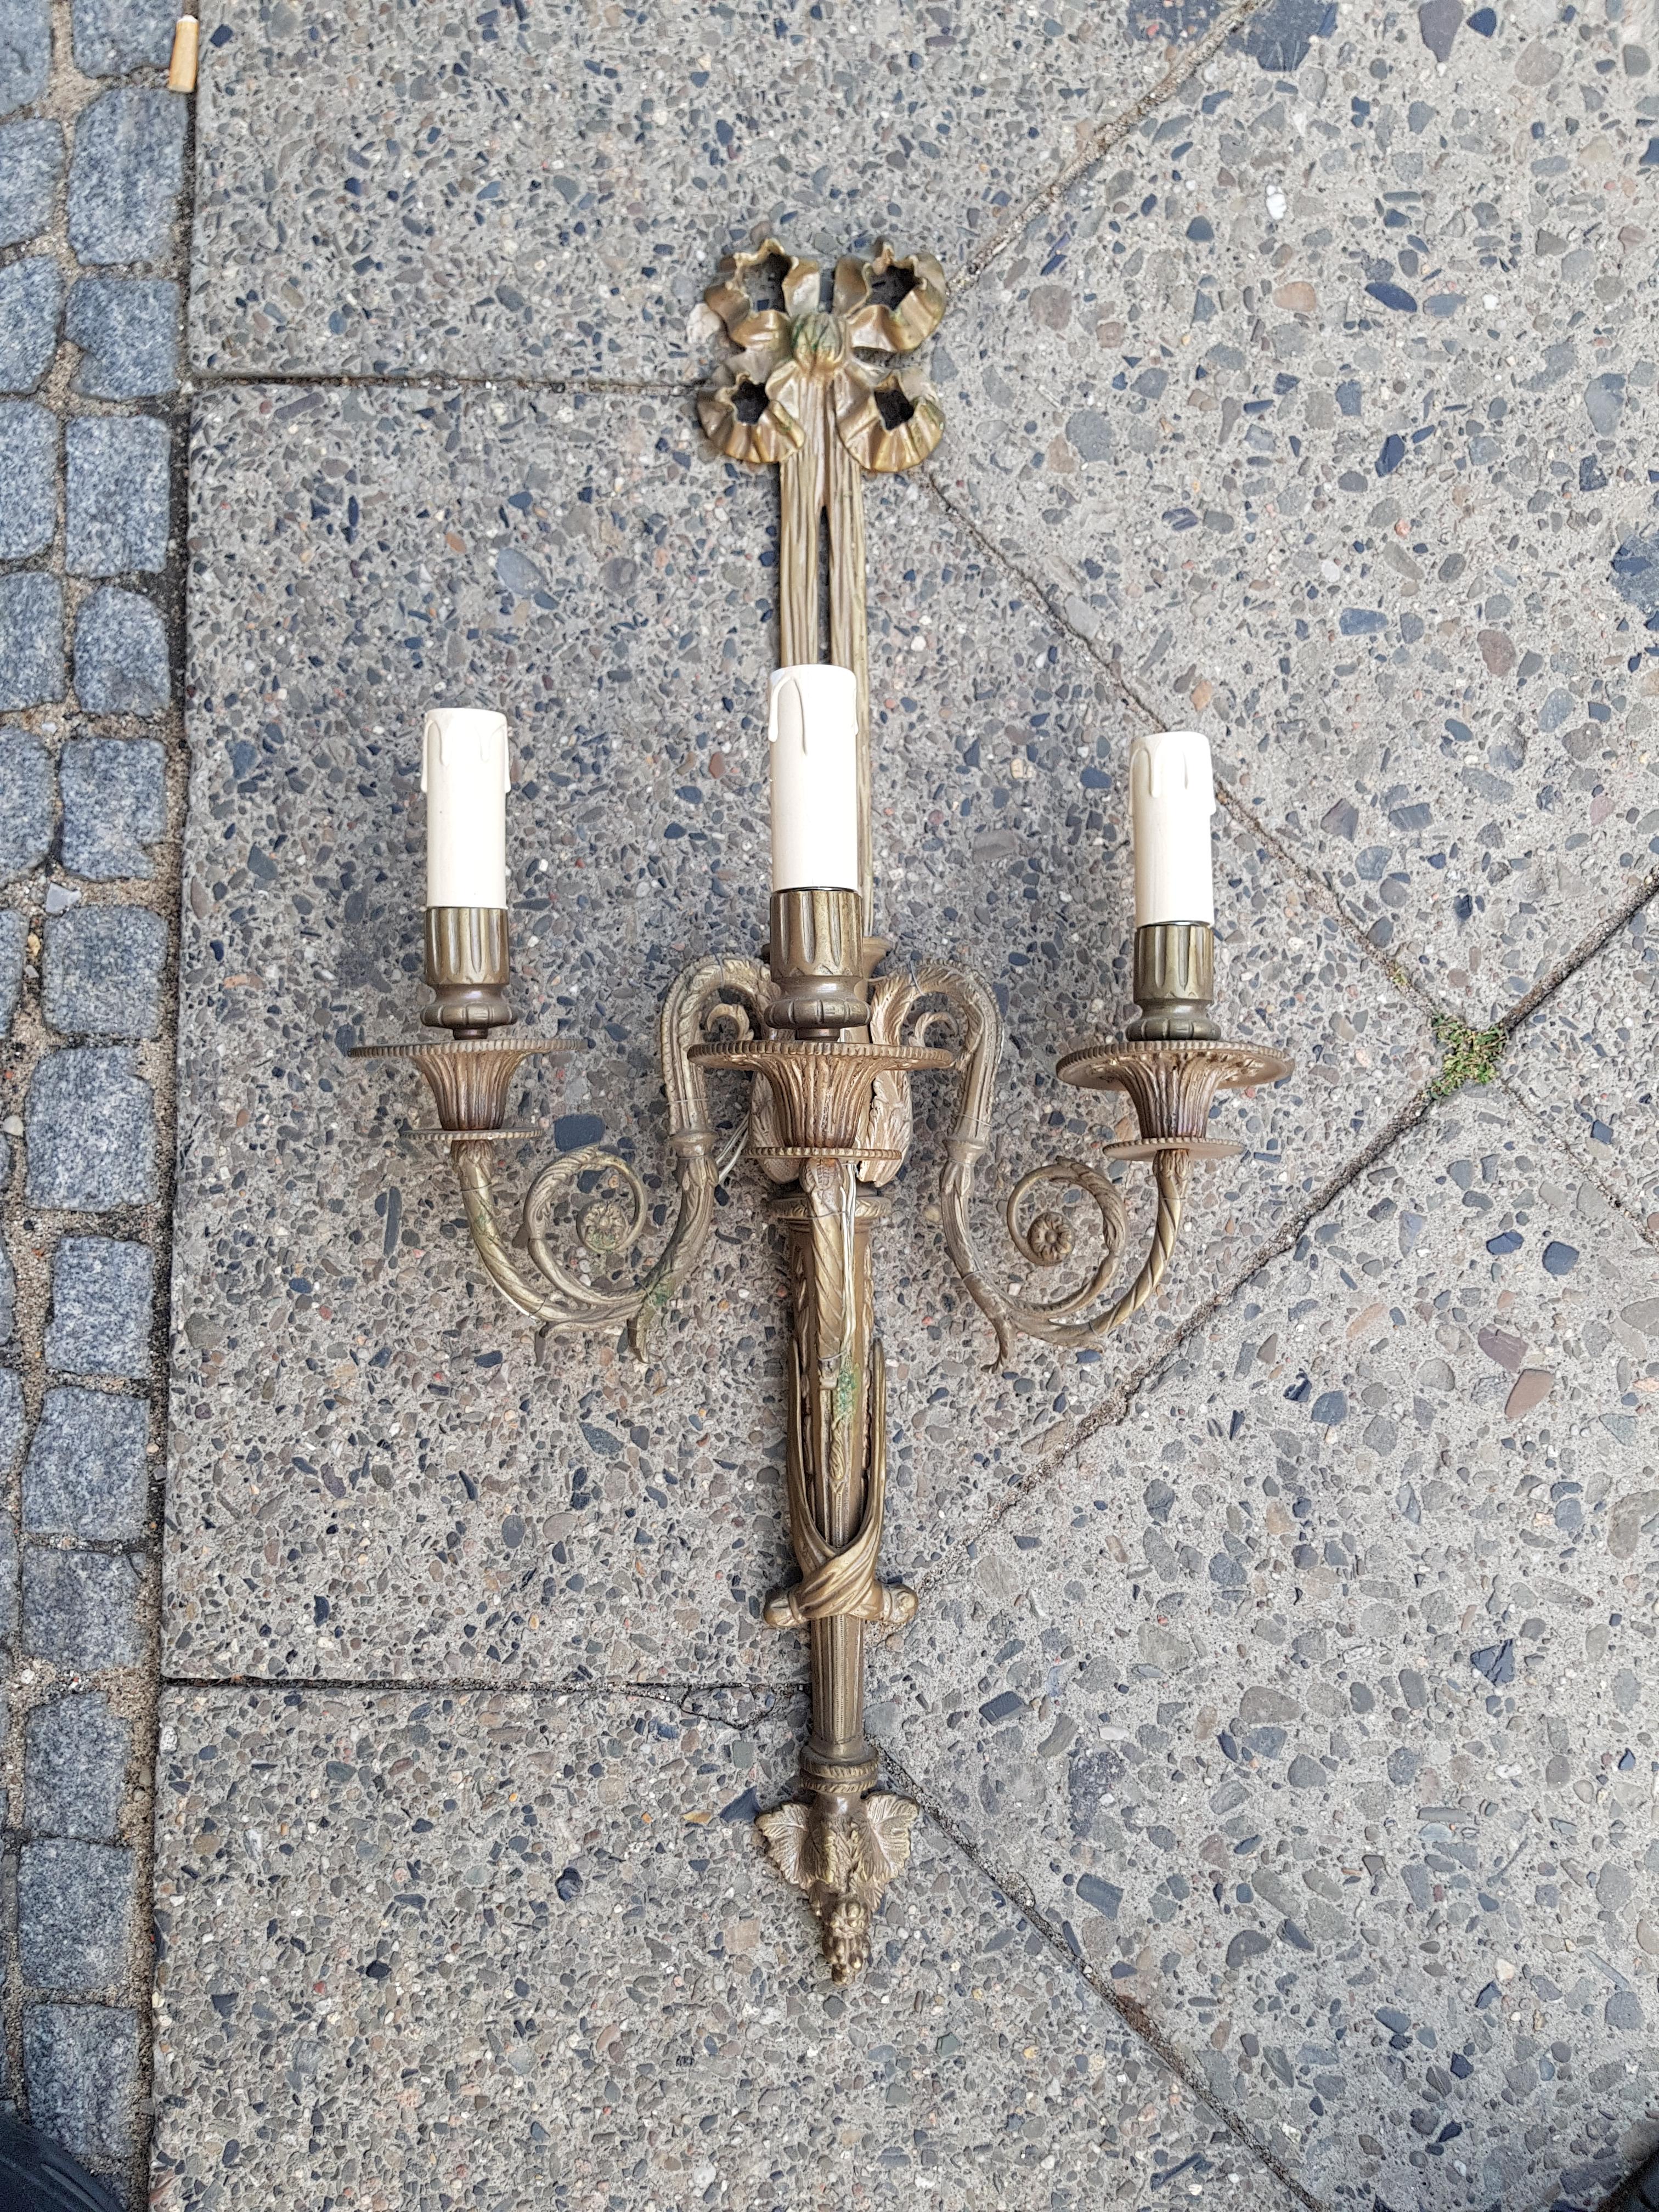 Set of 4 candlesticks wall lights
Measurements:
Height 67 cm
Diameter 25 cm
Date of manufacture circa 1930
Restored and rewired. PAT tested. Ready to hang.

 Set of 4 candlesticks wall lights sconce wall light.